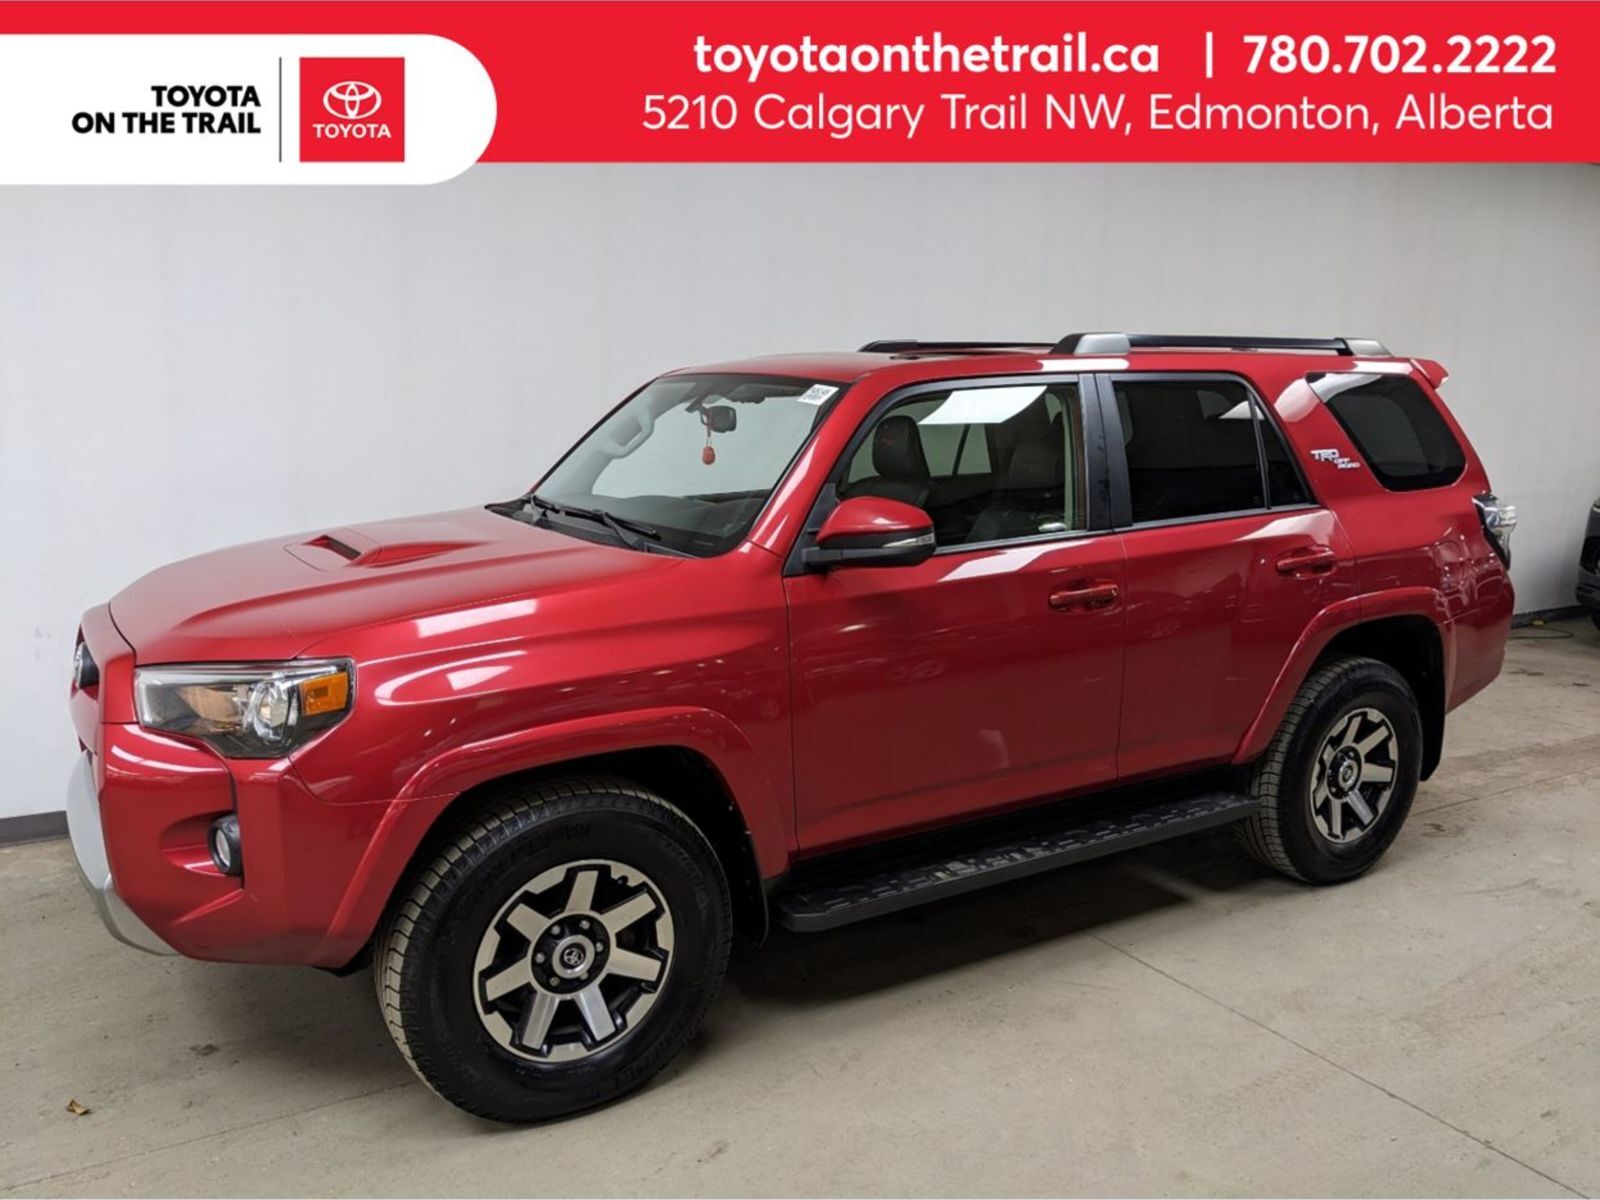 2019 Toyota 4Runner TRD OFF-ROAD; LEATHER, WINTER IRES, 3M, SUNROOF, N